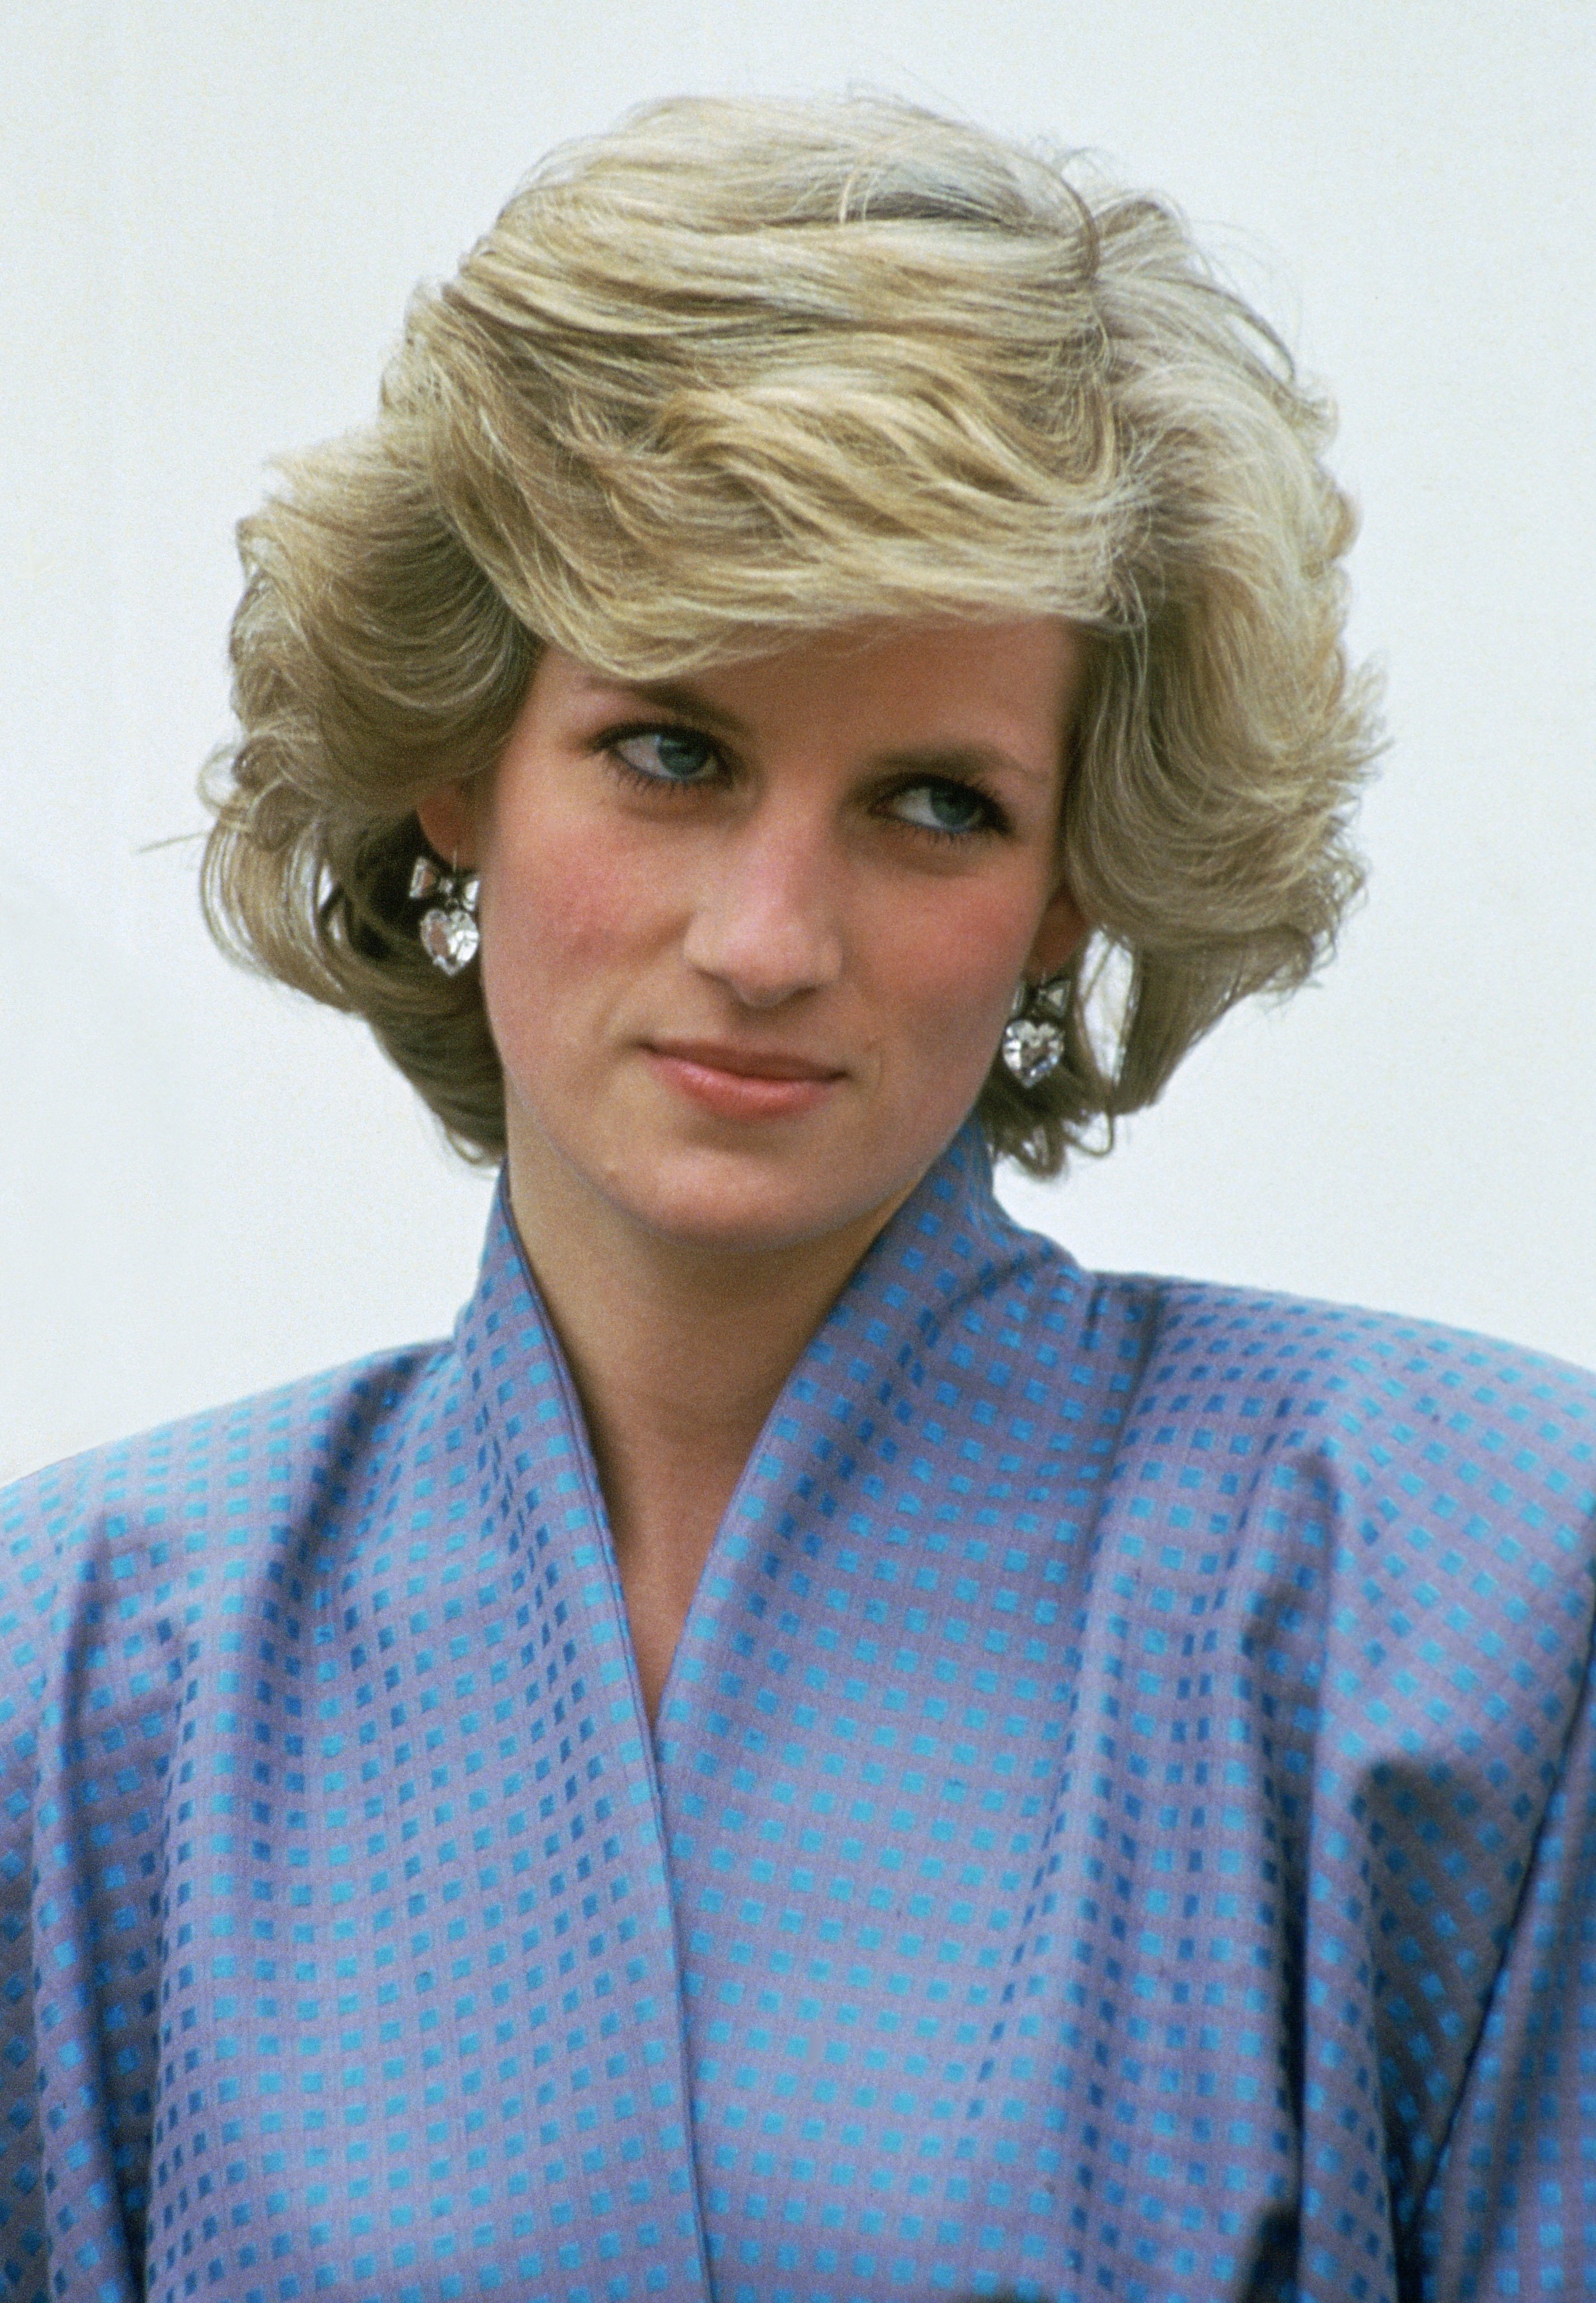 Princess Diana on an official overseas visit to Italy on April 22, 1985. | Source: Getty Images